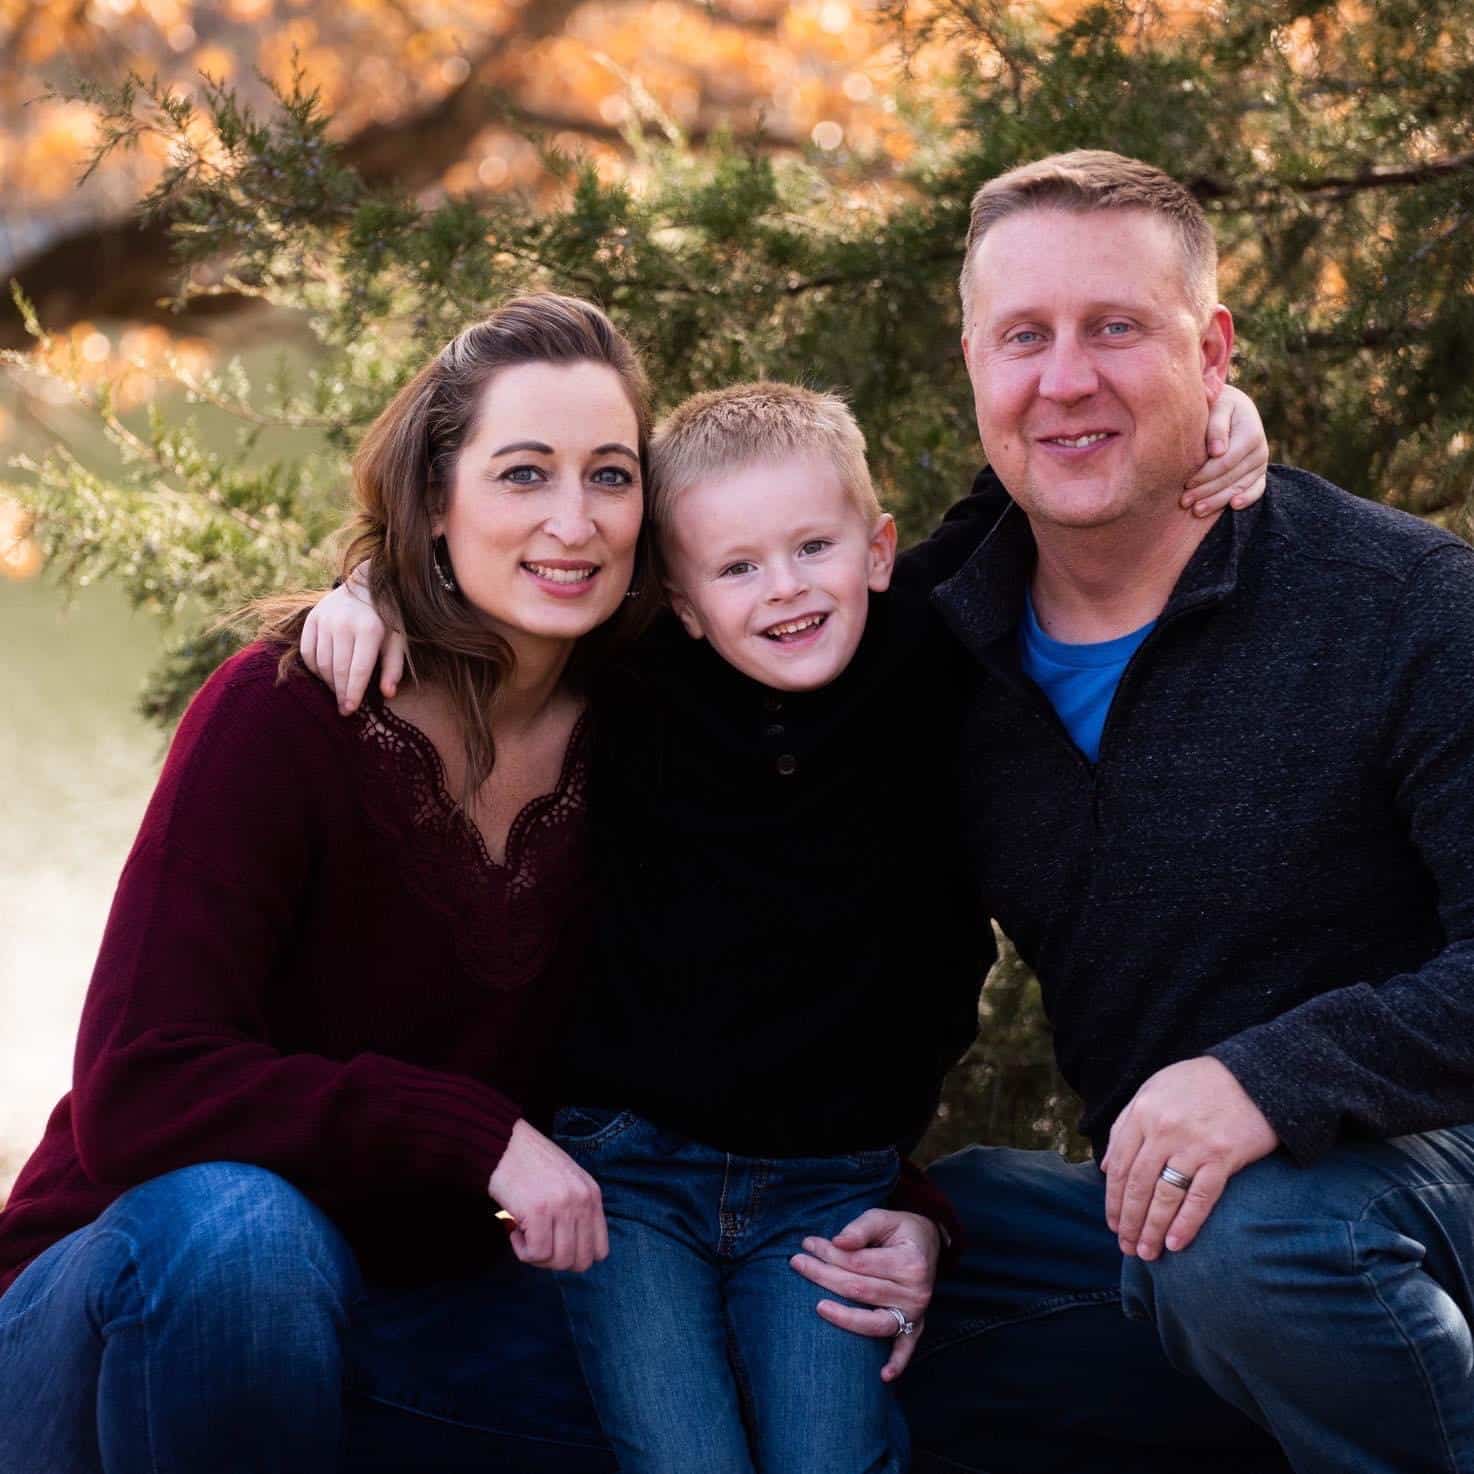 Mindy Keiser, son and husband family portrait outdoors.